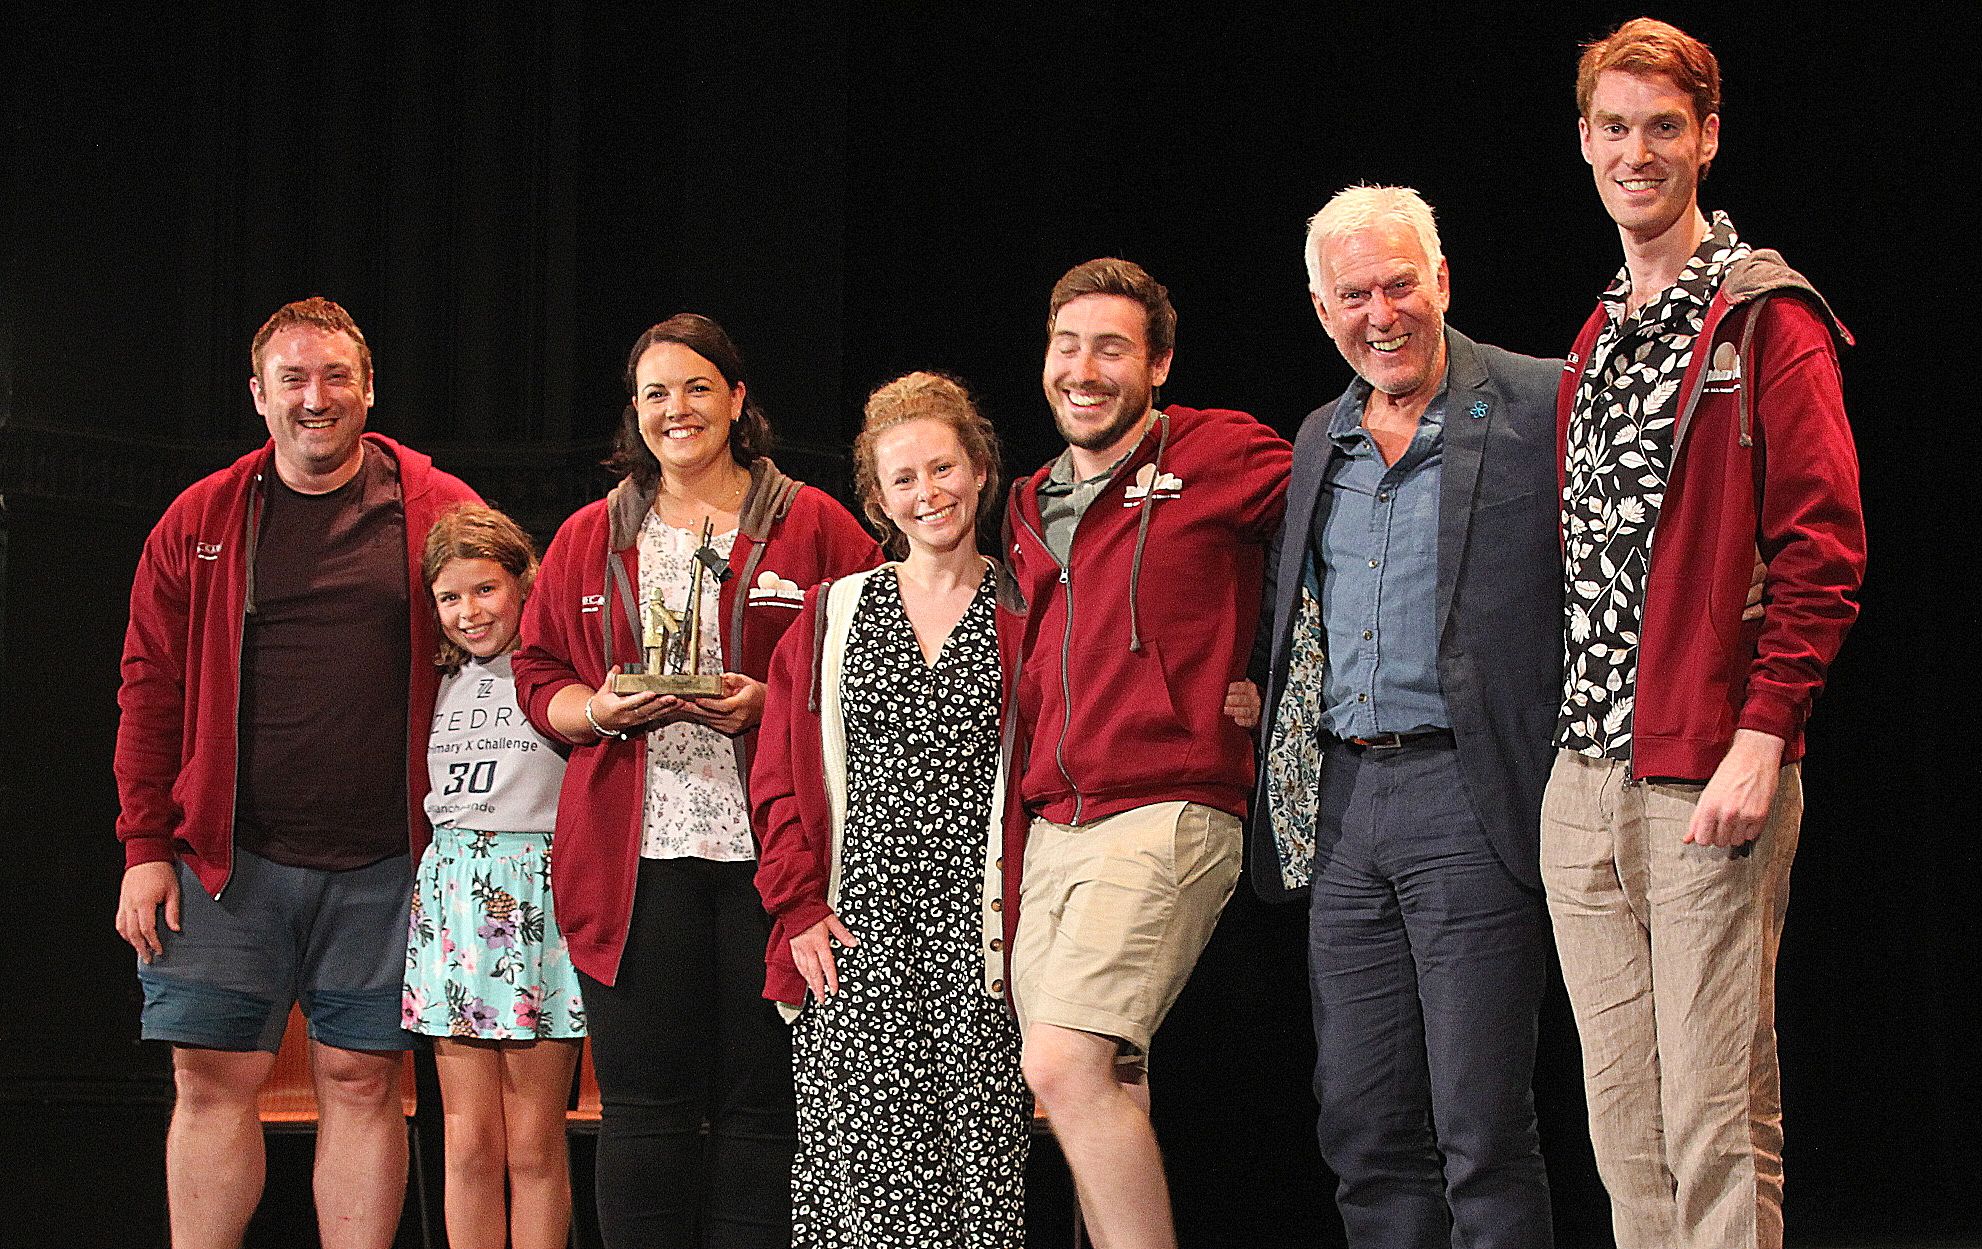 ‘Bad Eggs’ wins best team trophy at the National Drama Festival